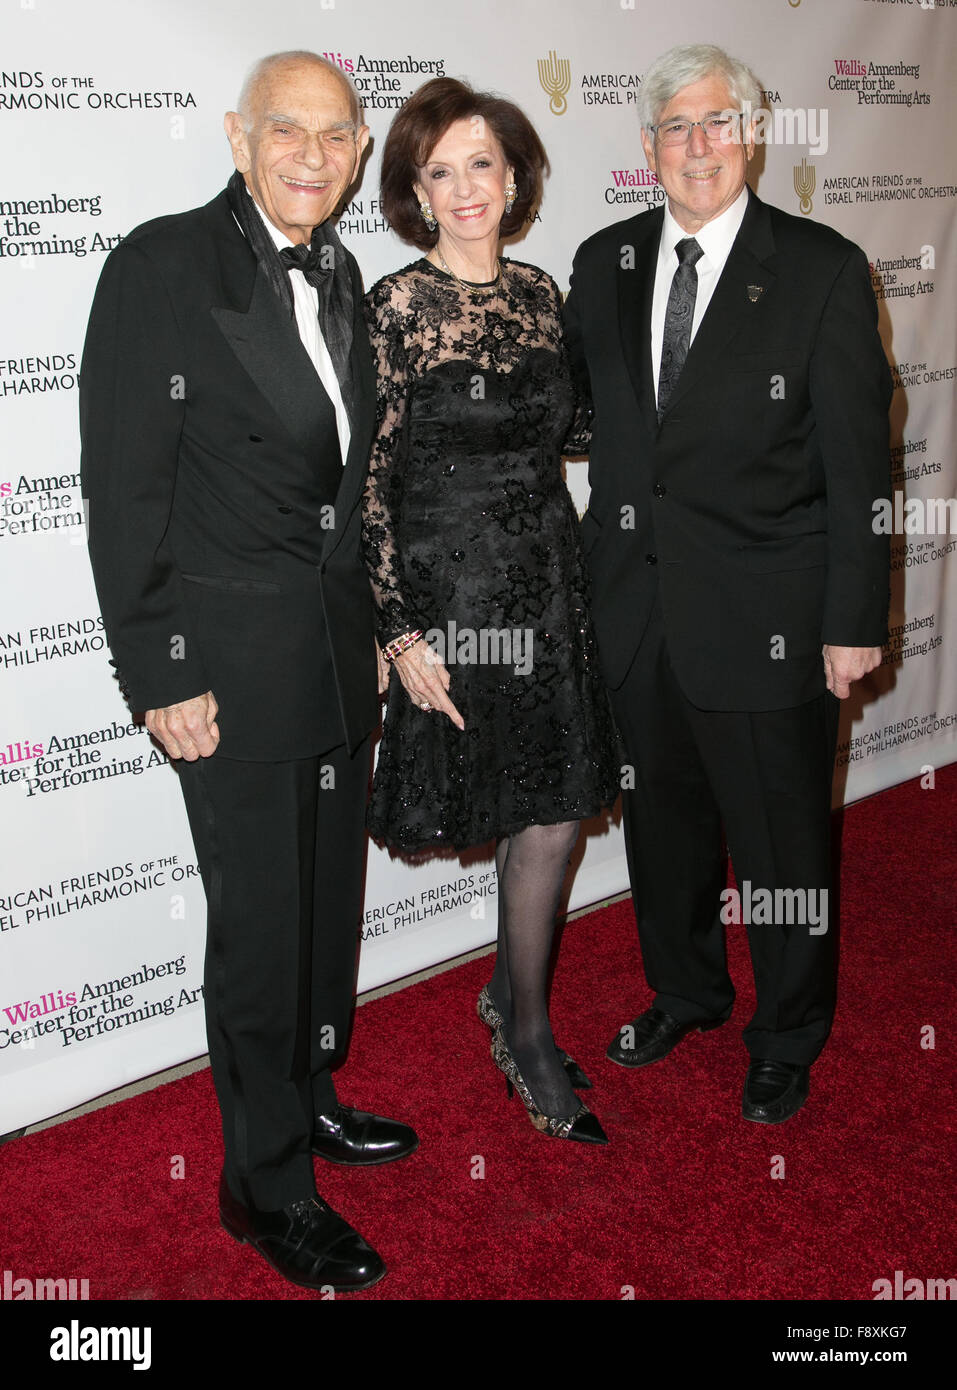 Celebrities attend The Wallis Annenberg Center for the Performing Arts and the American Friends of the Israel Philharmonic Orchestra’s “Duet Gala” at Wallis Annenberg Center for the Performing Arts in Beverly Hills.  Featuring: Murray Pepper, Vicki Reynol Stock Photo